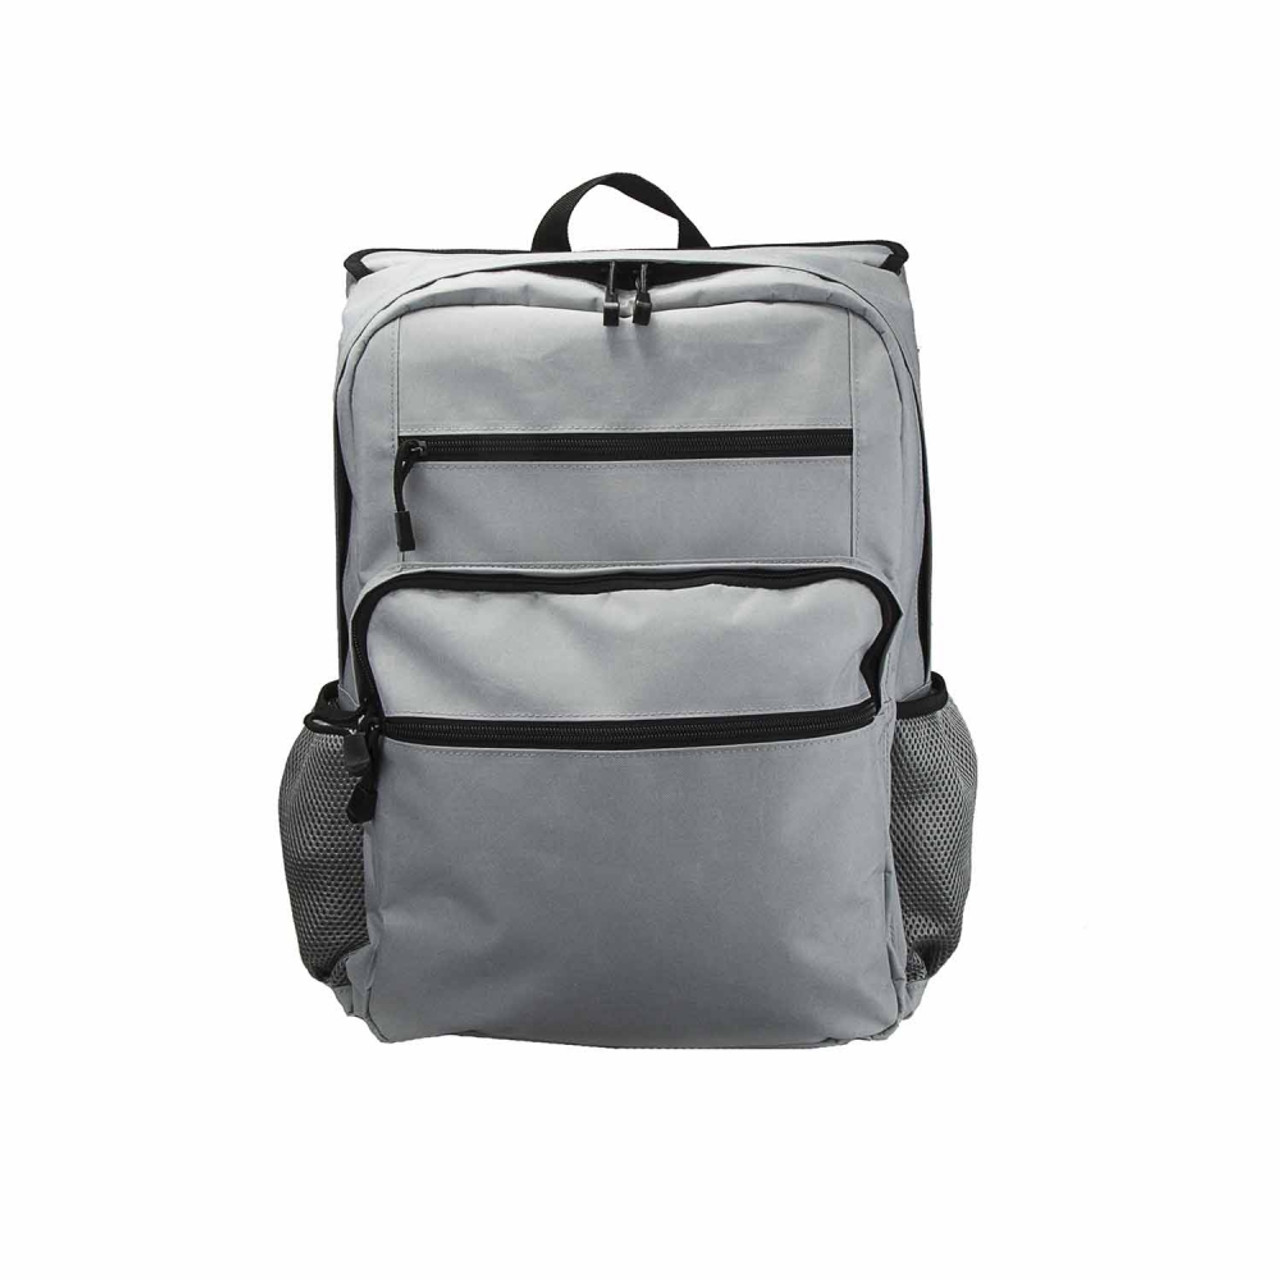 NcSTAR BGBPS3003LG Guardianpack Backpack With Front And Rear Compartment For Soft Body Armor (Not Included)